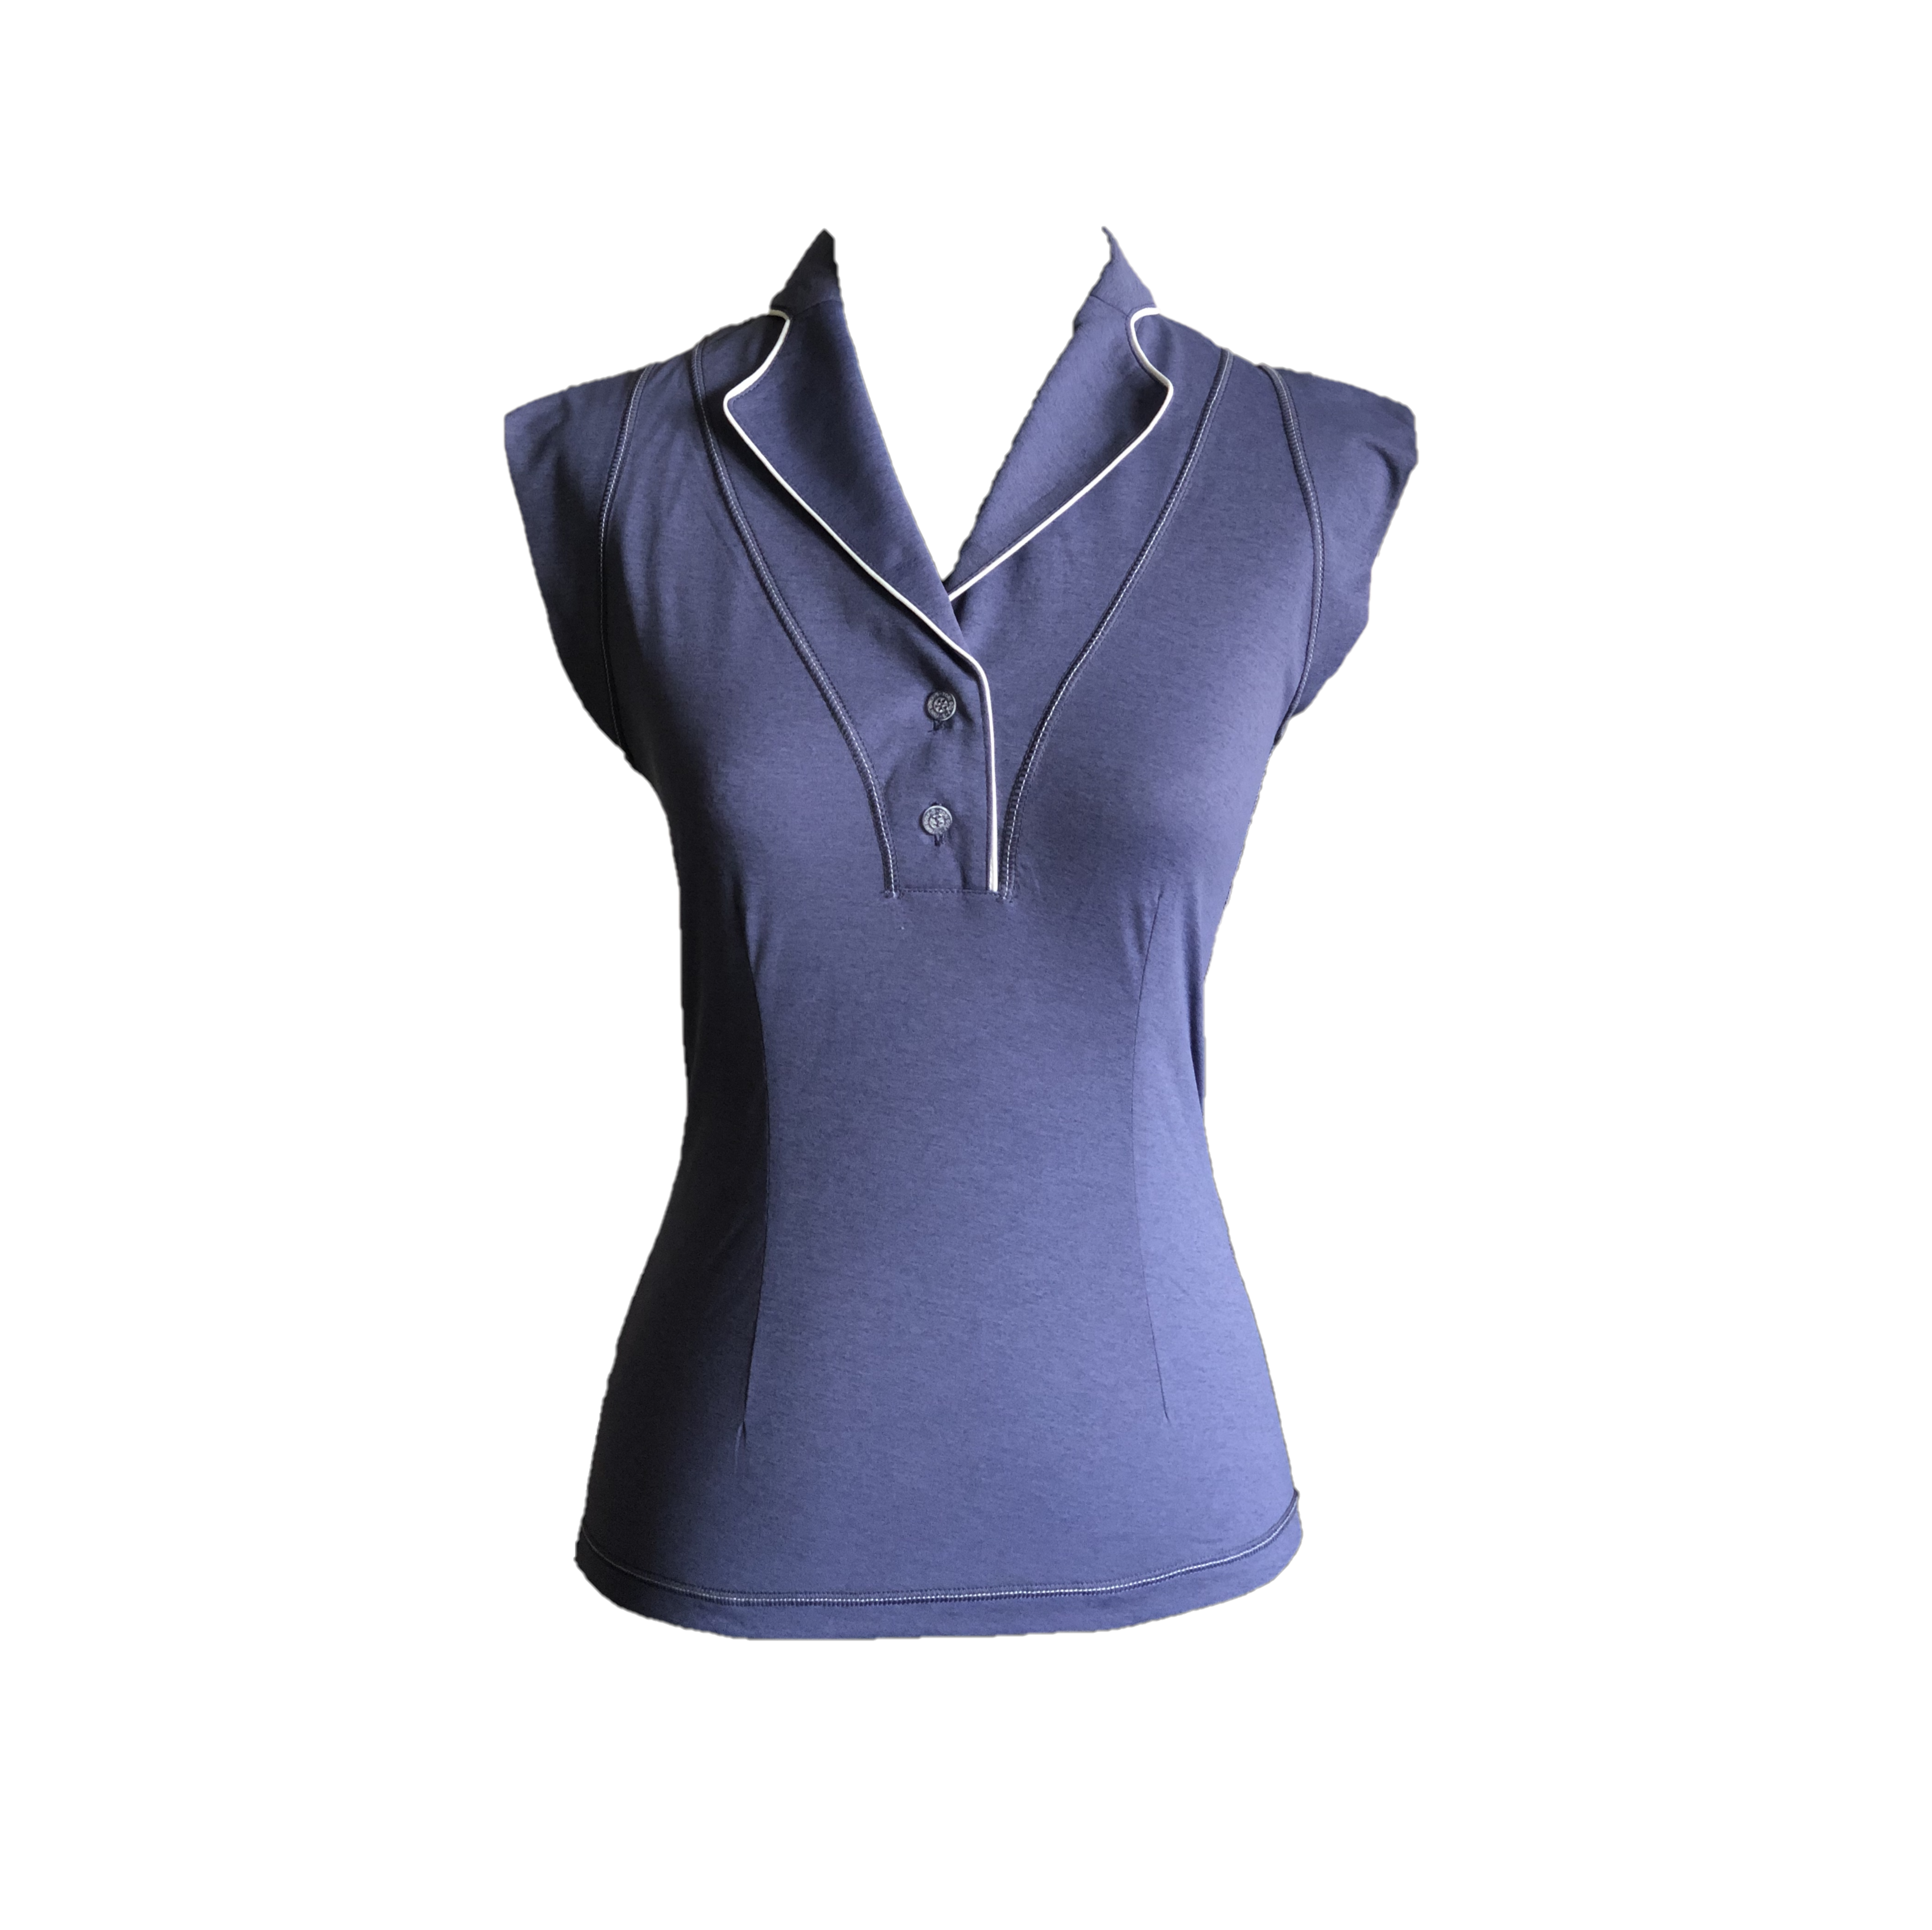 LT-111A || Ladies Top Smoke Blue Sleeveless  Shawl Neck 2 Buttons with White Piping